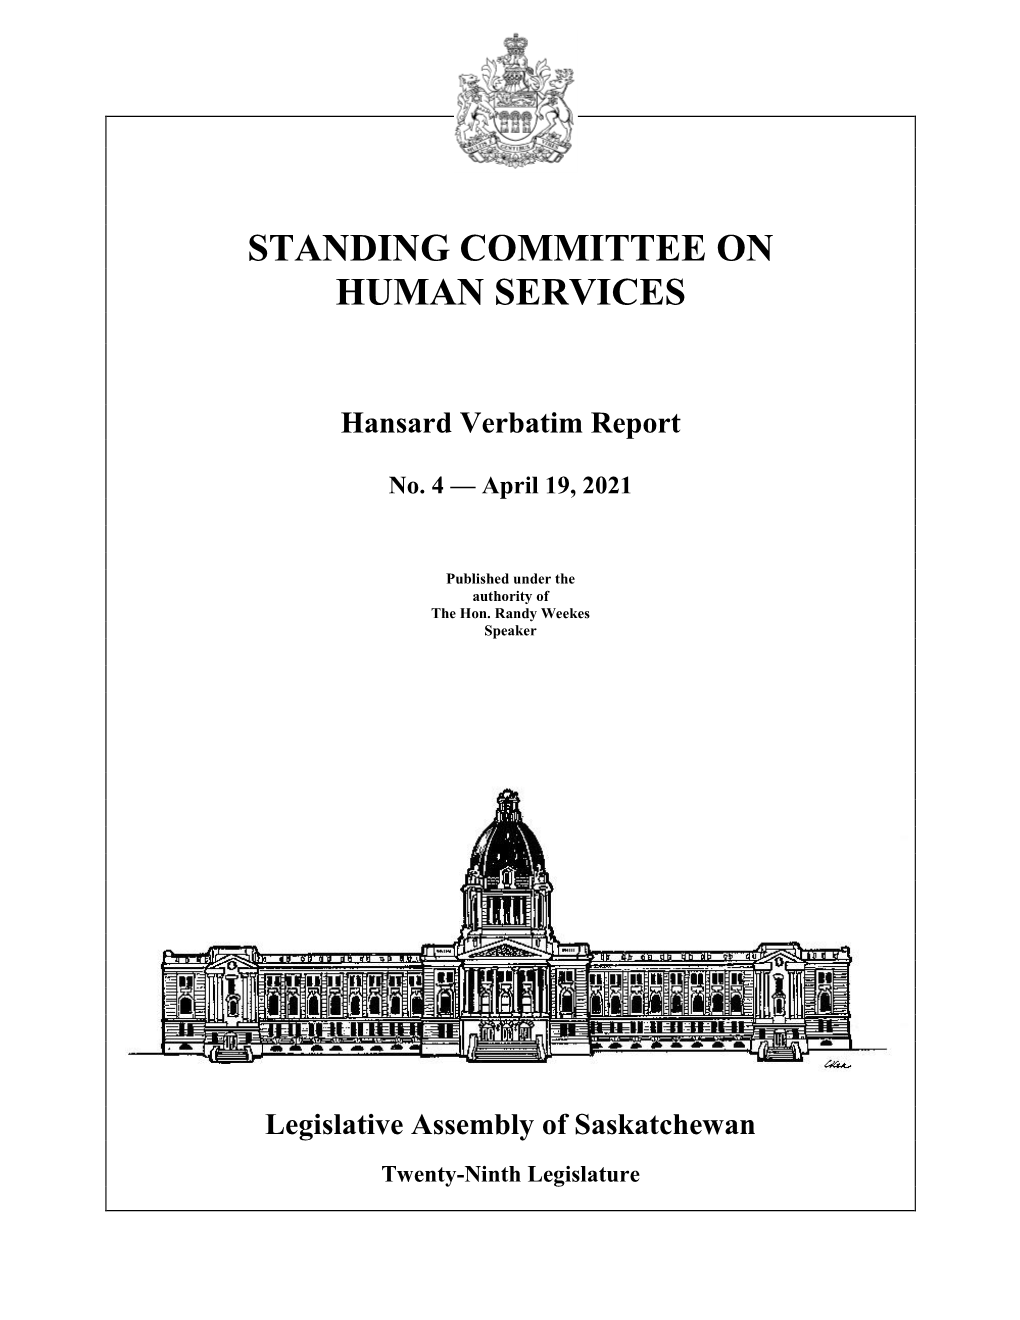 April 19, 2021 Human Services Committee